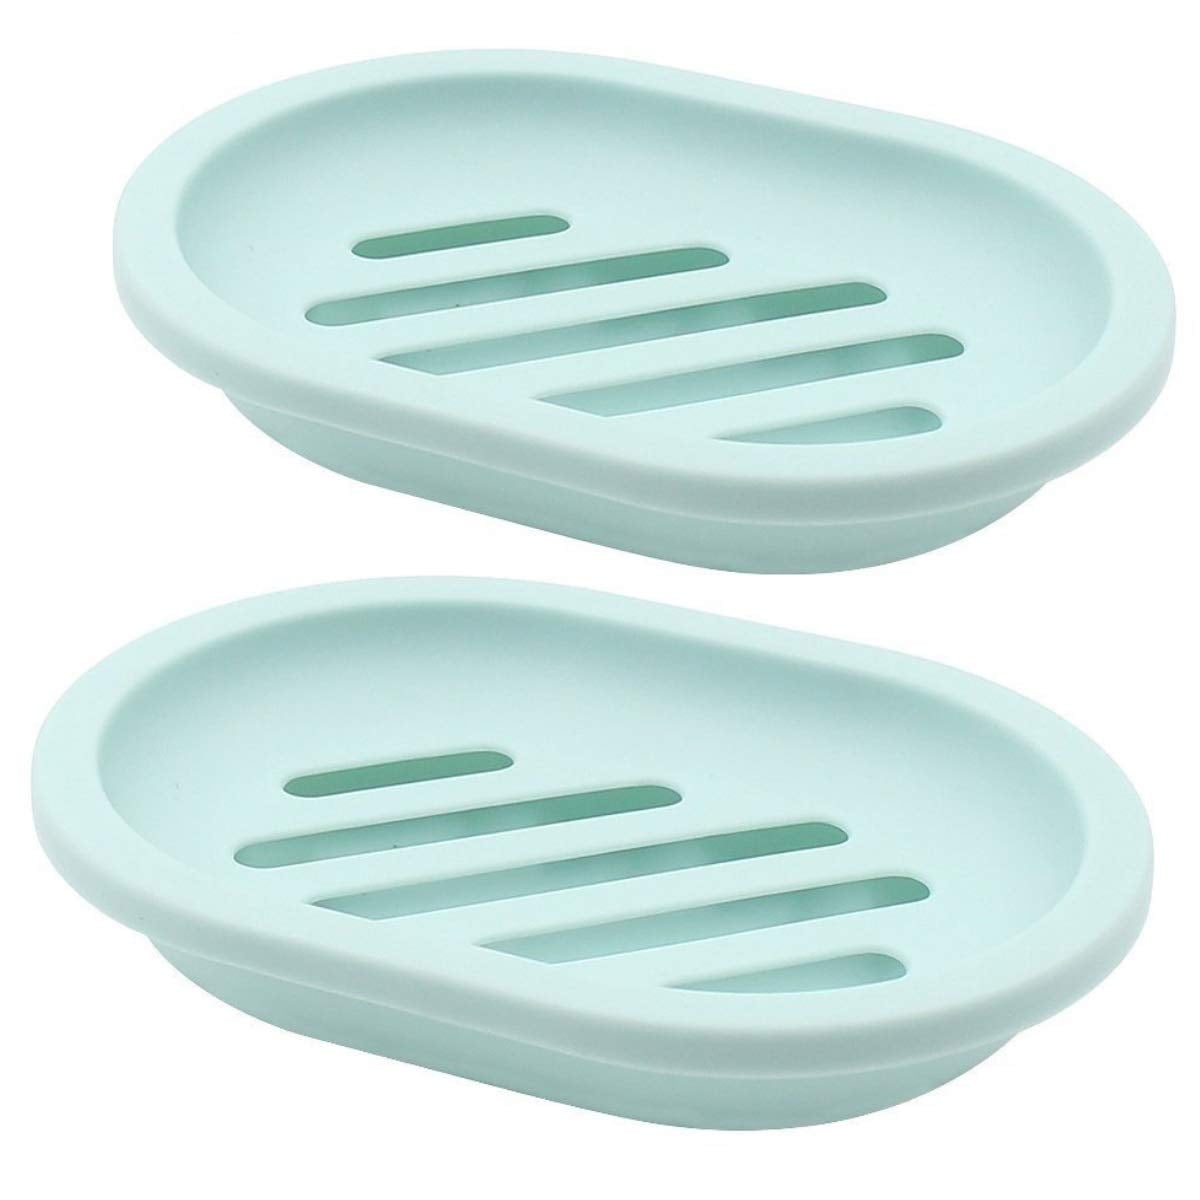 iDesign Soap Savers Dish/Holder Oval Shaped Plastic Clear Small Set of 2 